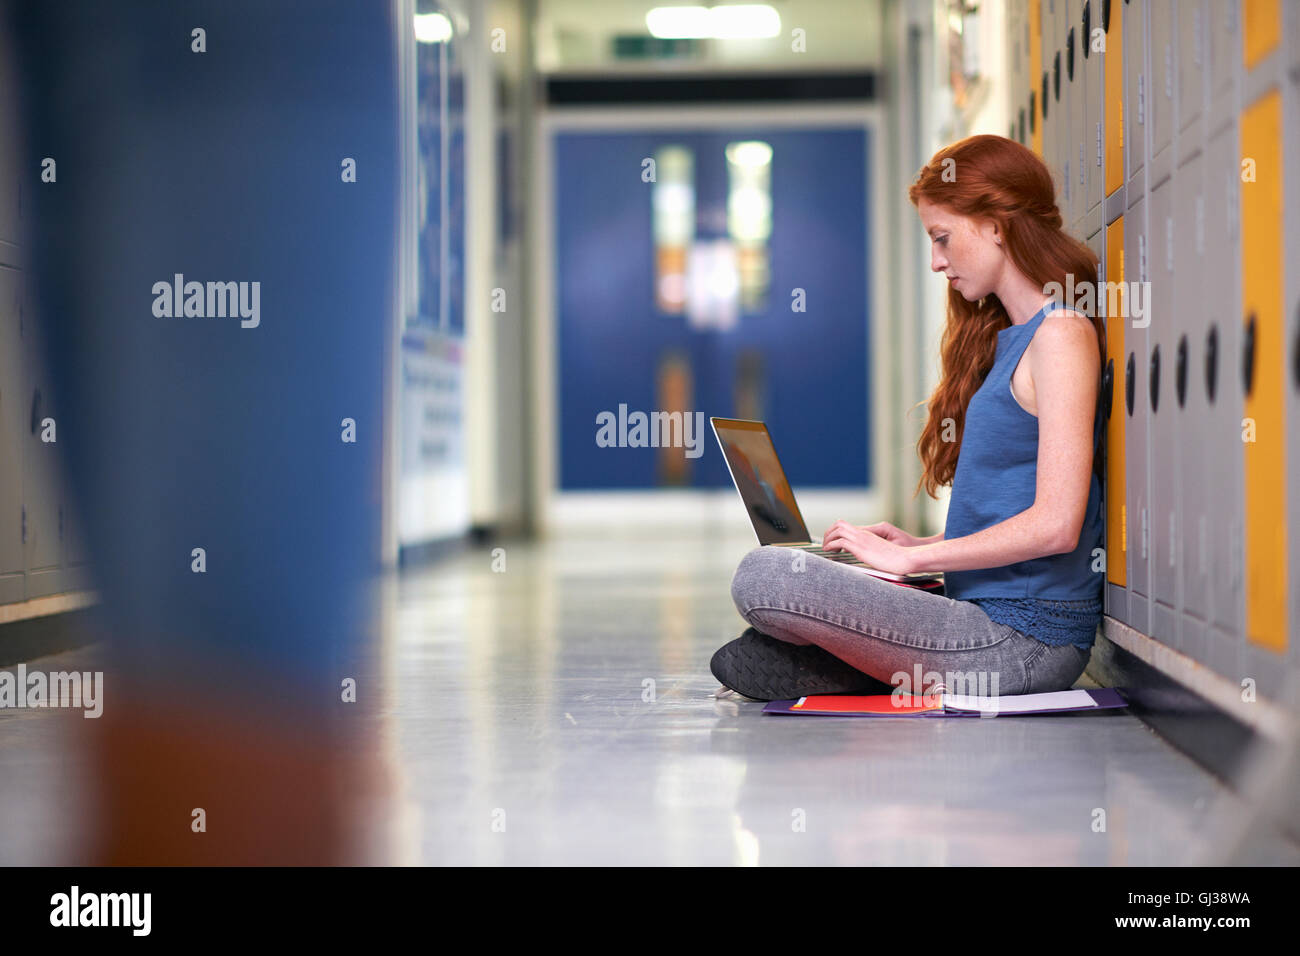 Young female college student sitting on vestiaire étage typing on laptop Banque D'Images